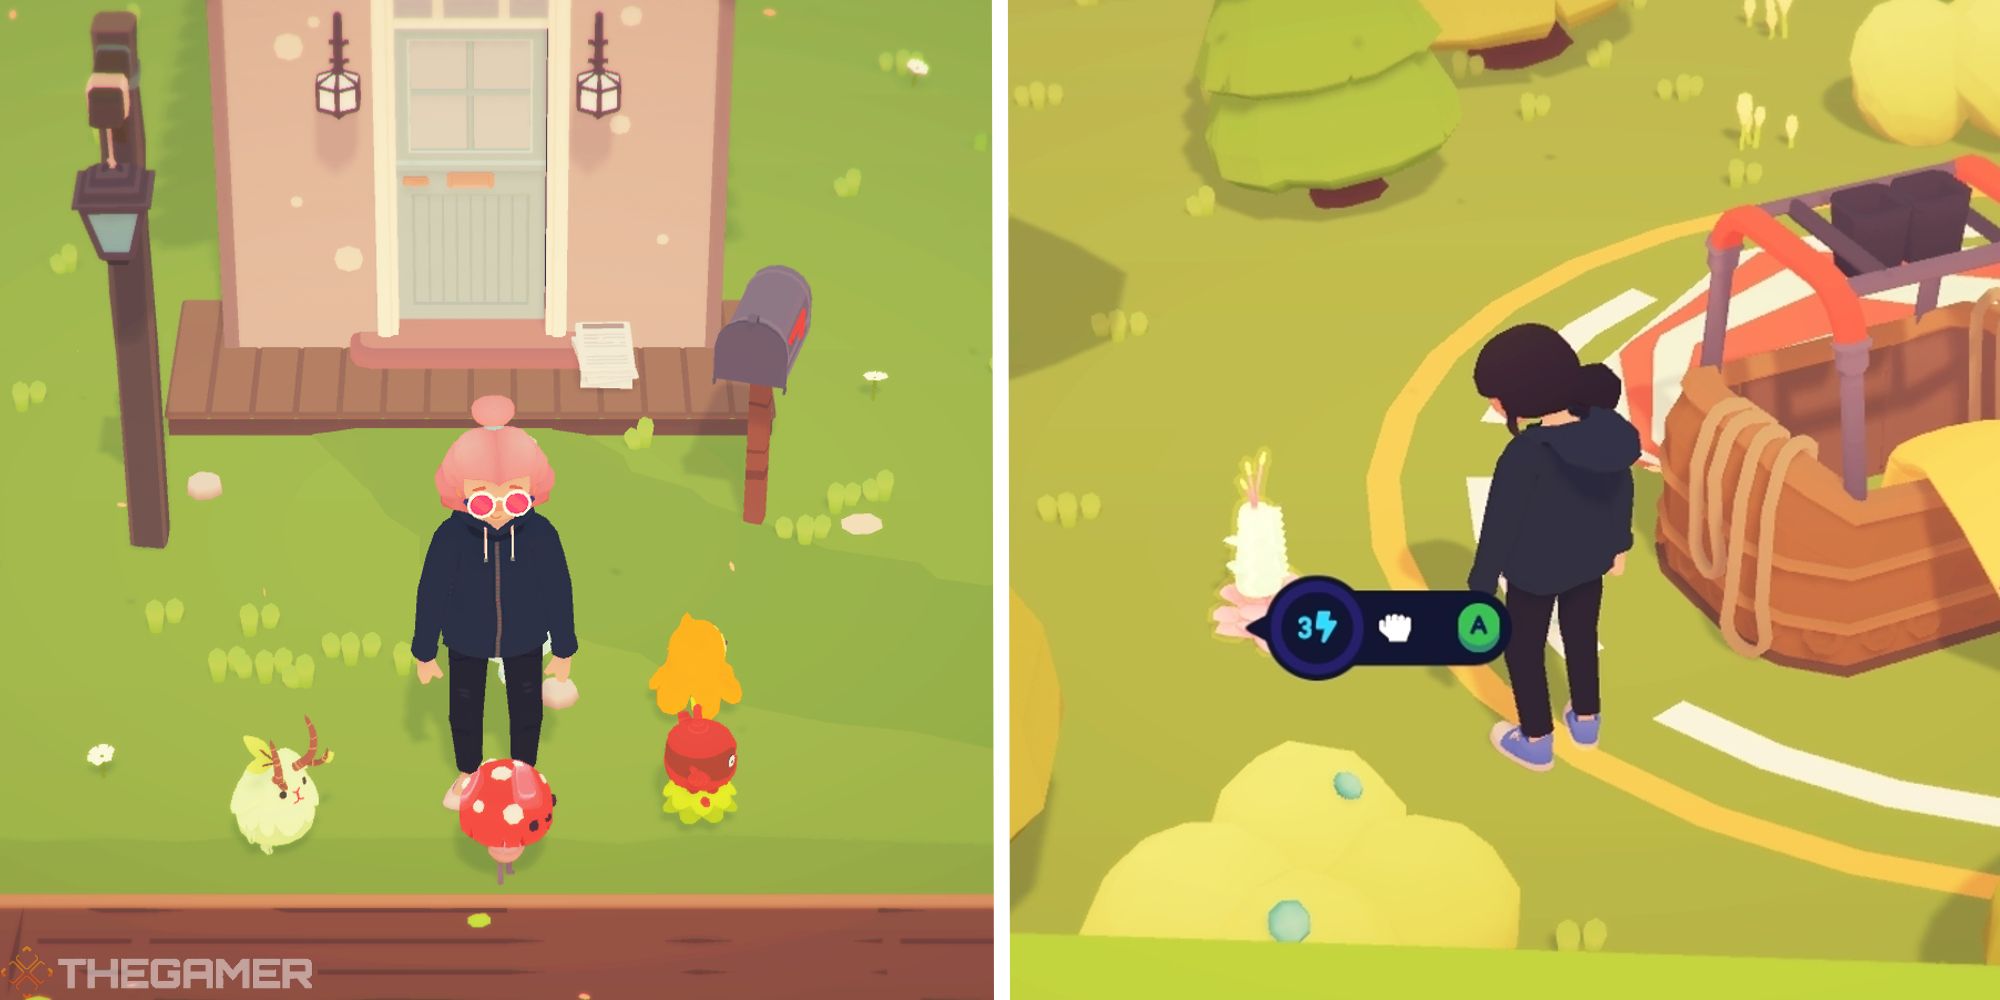 image of player at farm next to image of player looking at clothlet